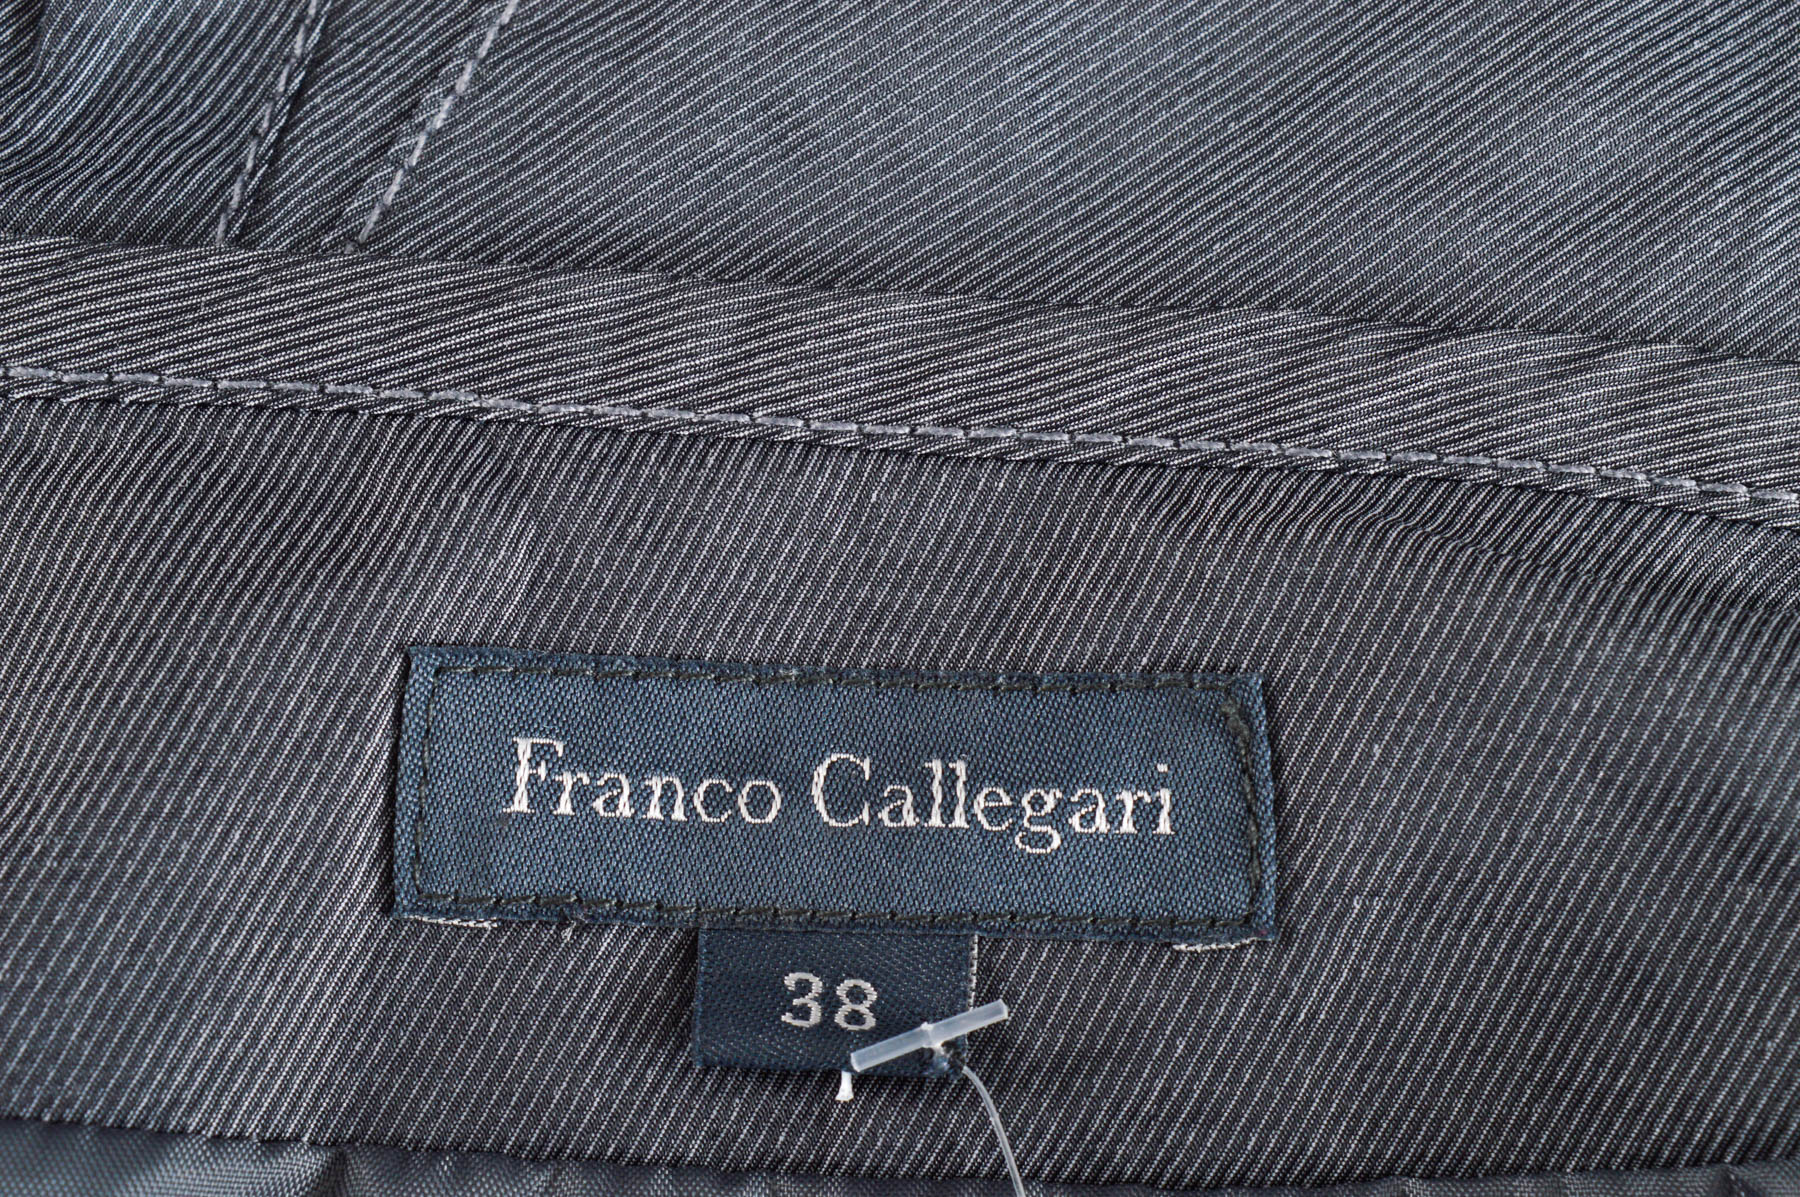 Skirt with a wrinkled effect - Franco Callegari - 2